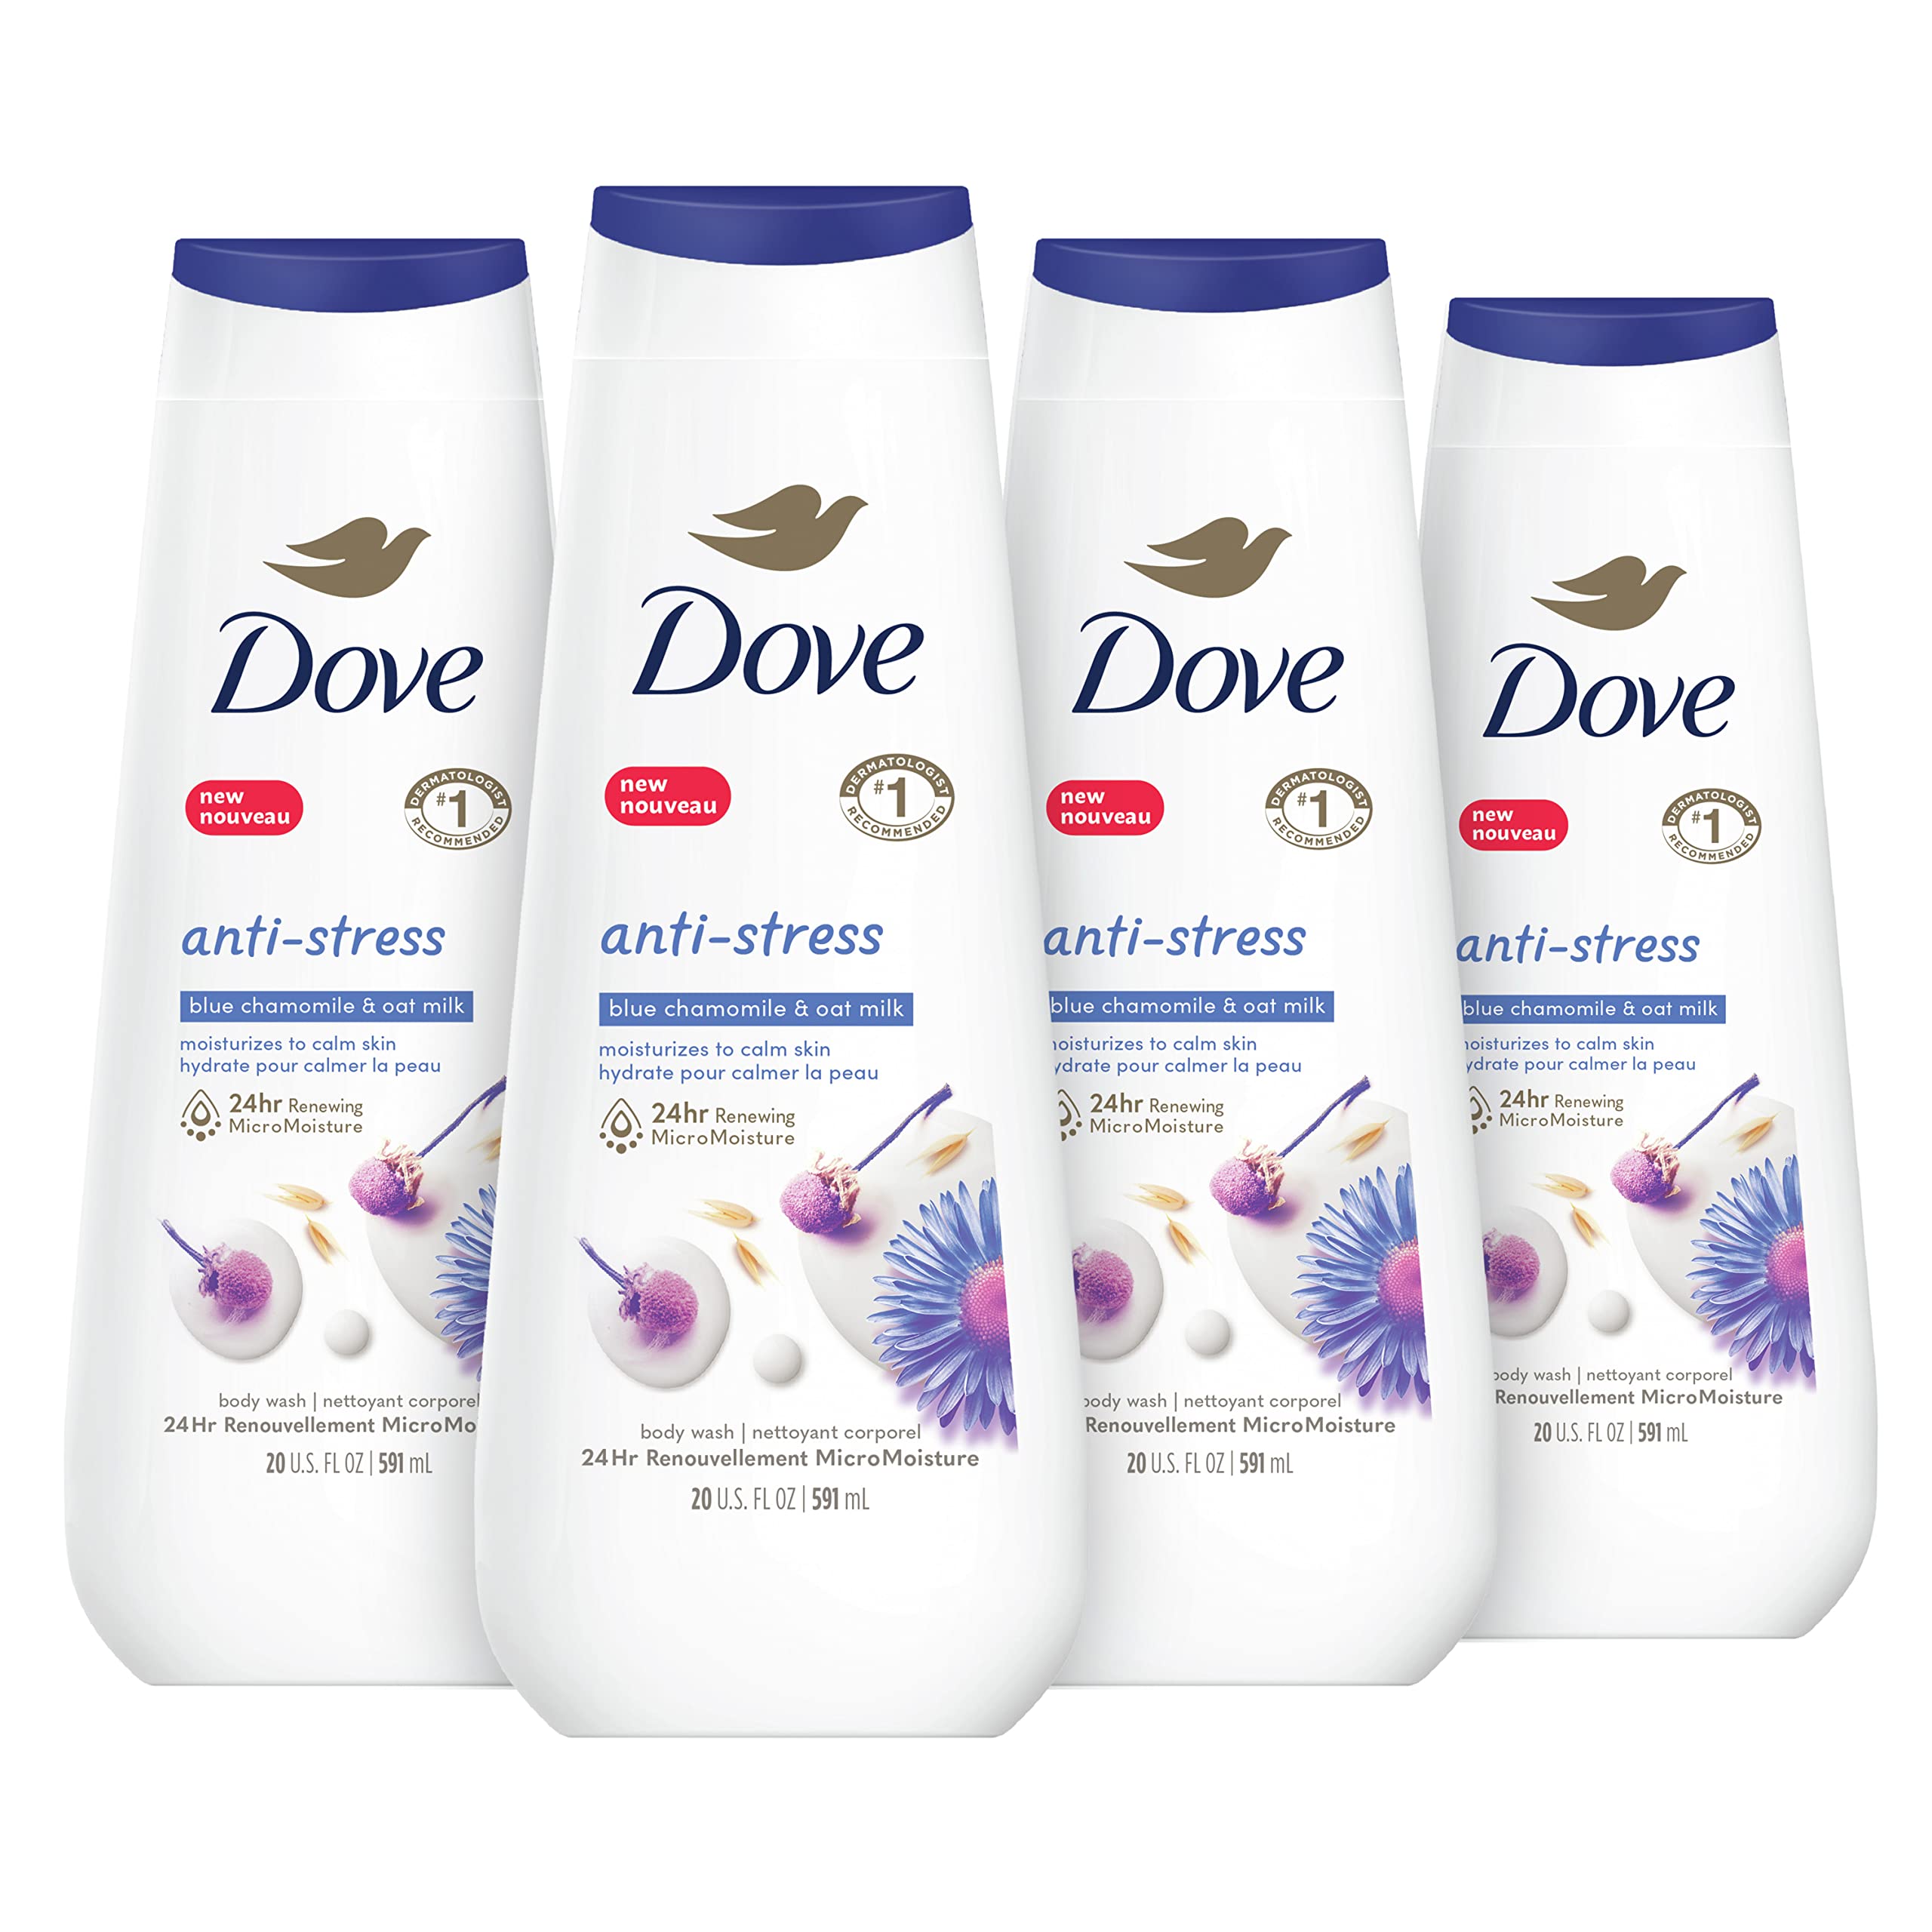 Dove Body Wash Anti-Stress Blue Chamomile & Oat Milk 4 Count for Renewed, Healthy-Looking Skin Moisturizing Gentle Skin Cleanser with 24hr Renewing MicroMoisture 20 oz